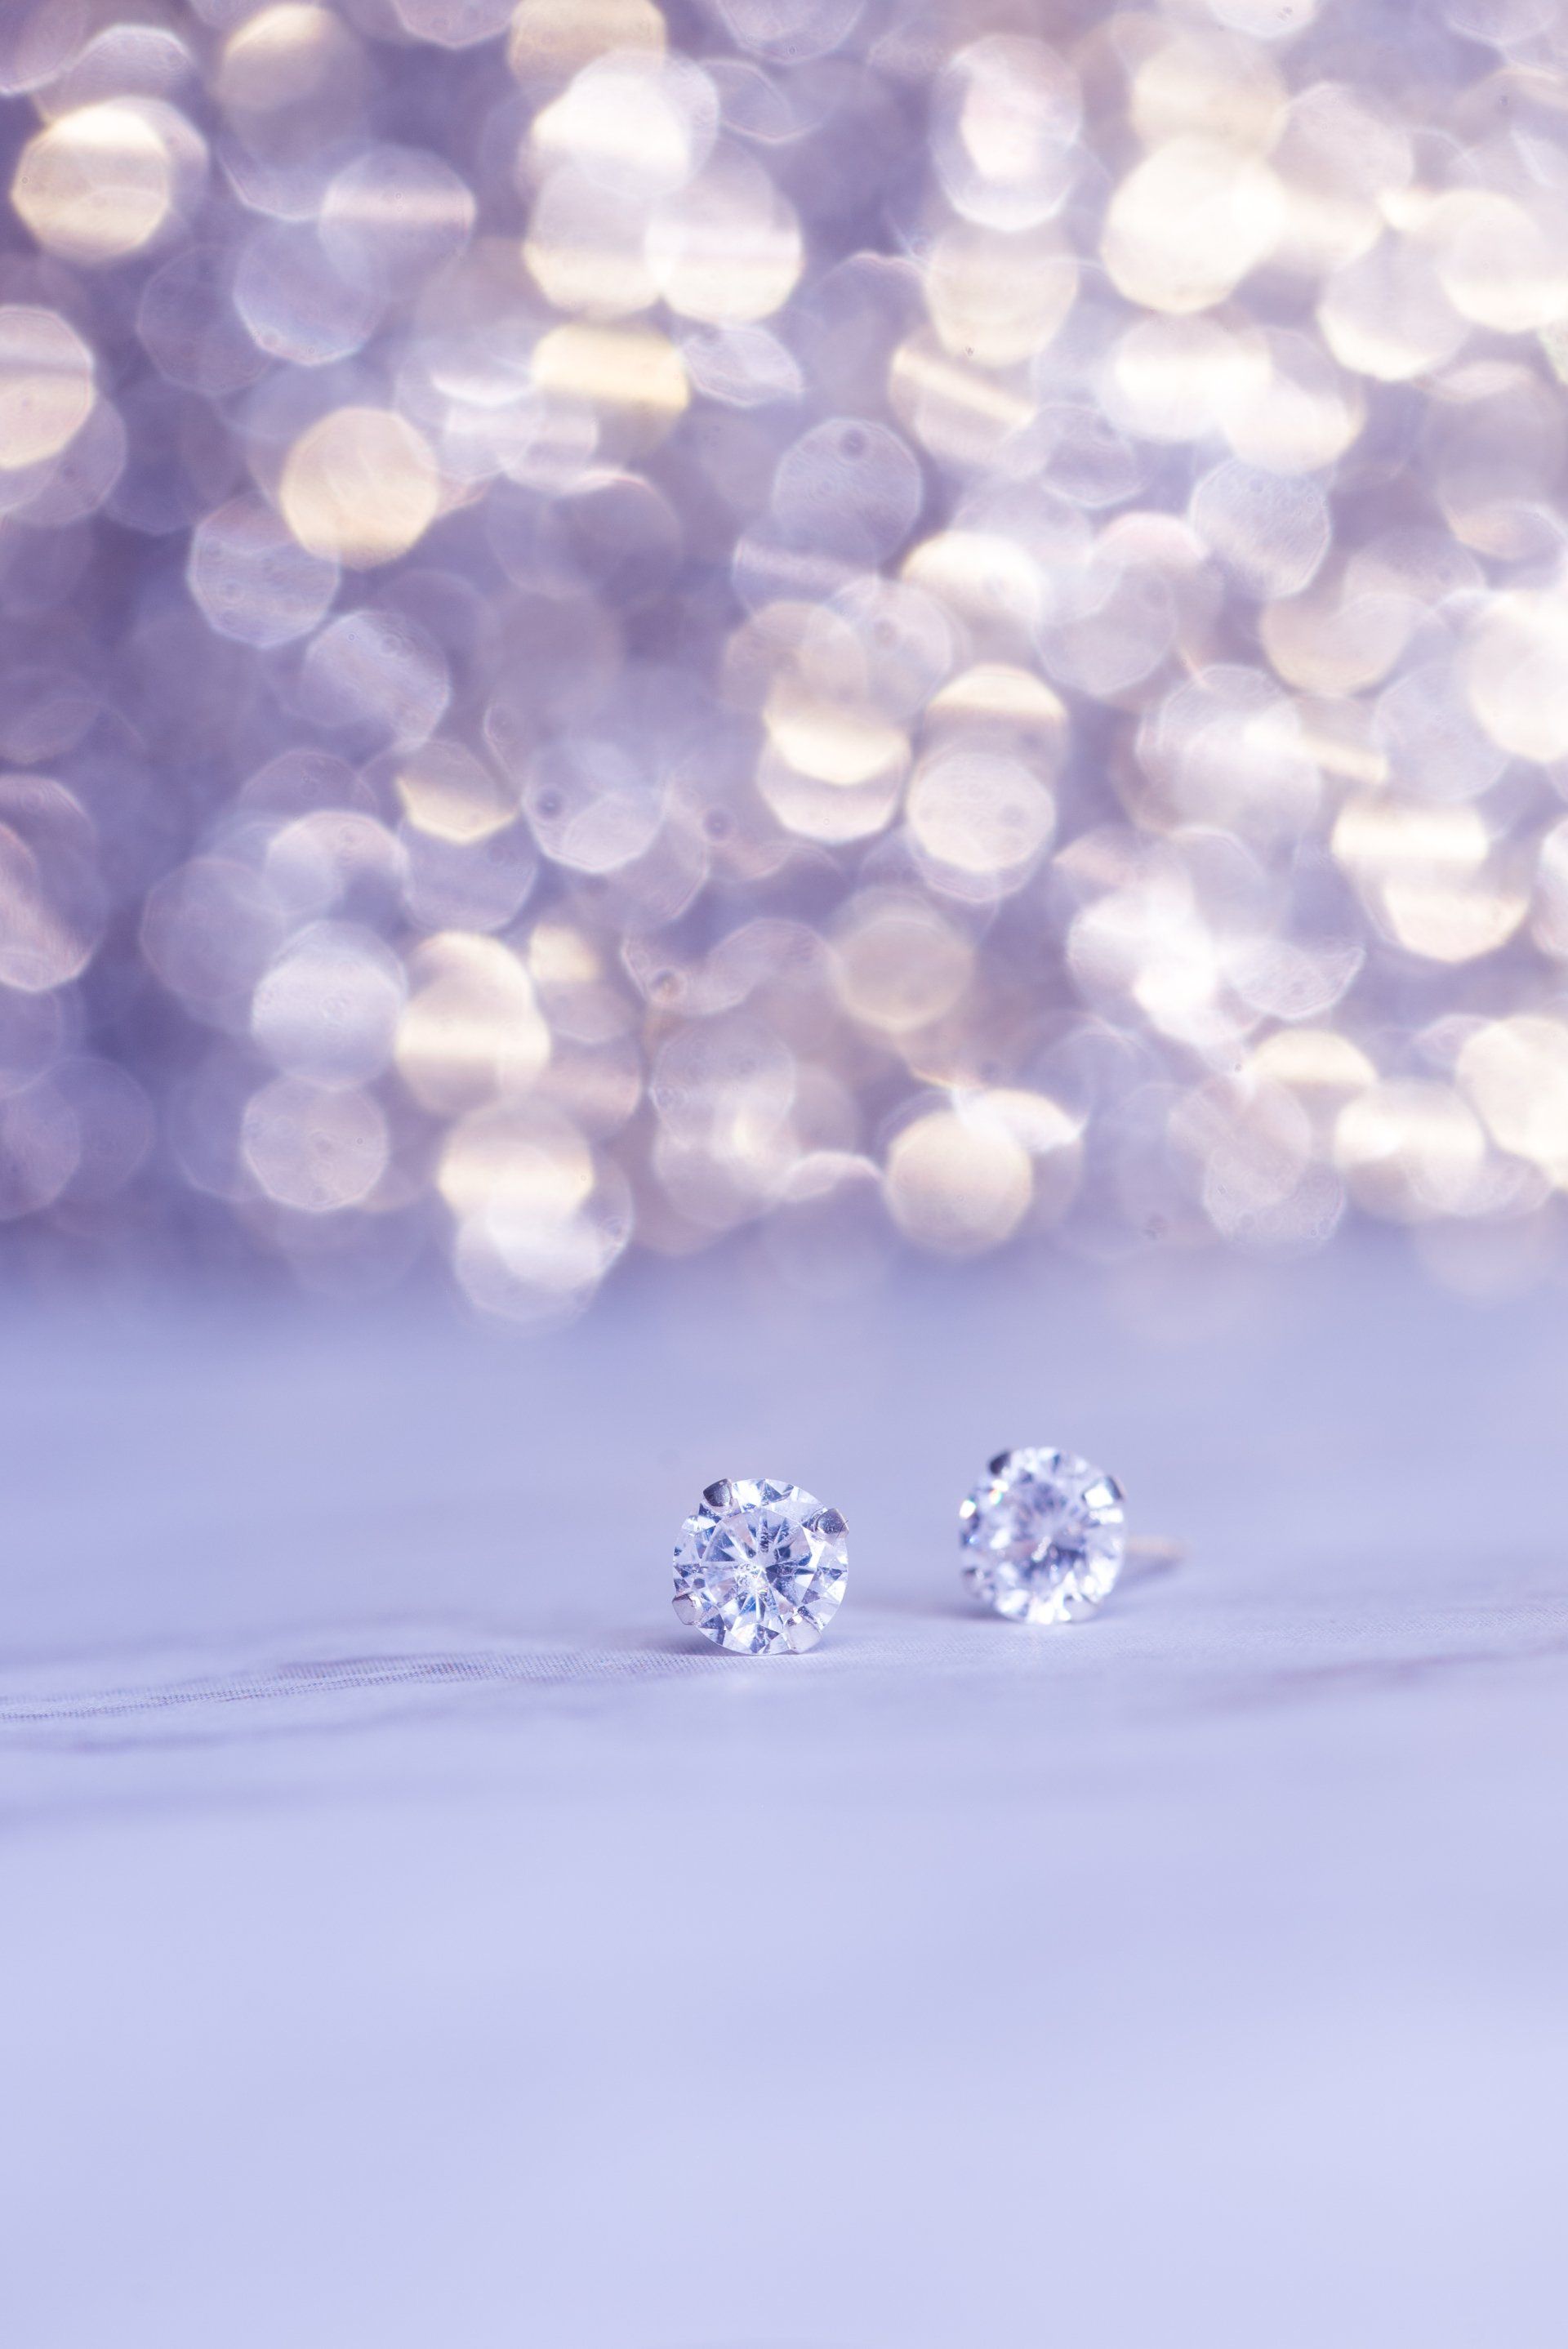 A pair of diamond stud earrings are sitting on a purple surface.